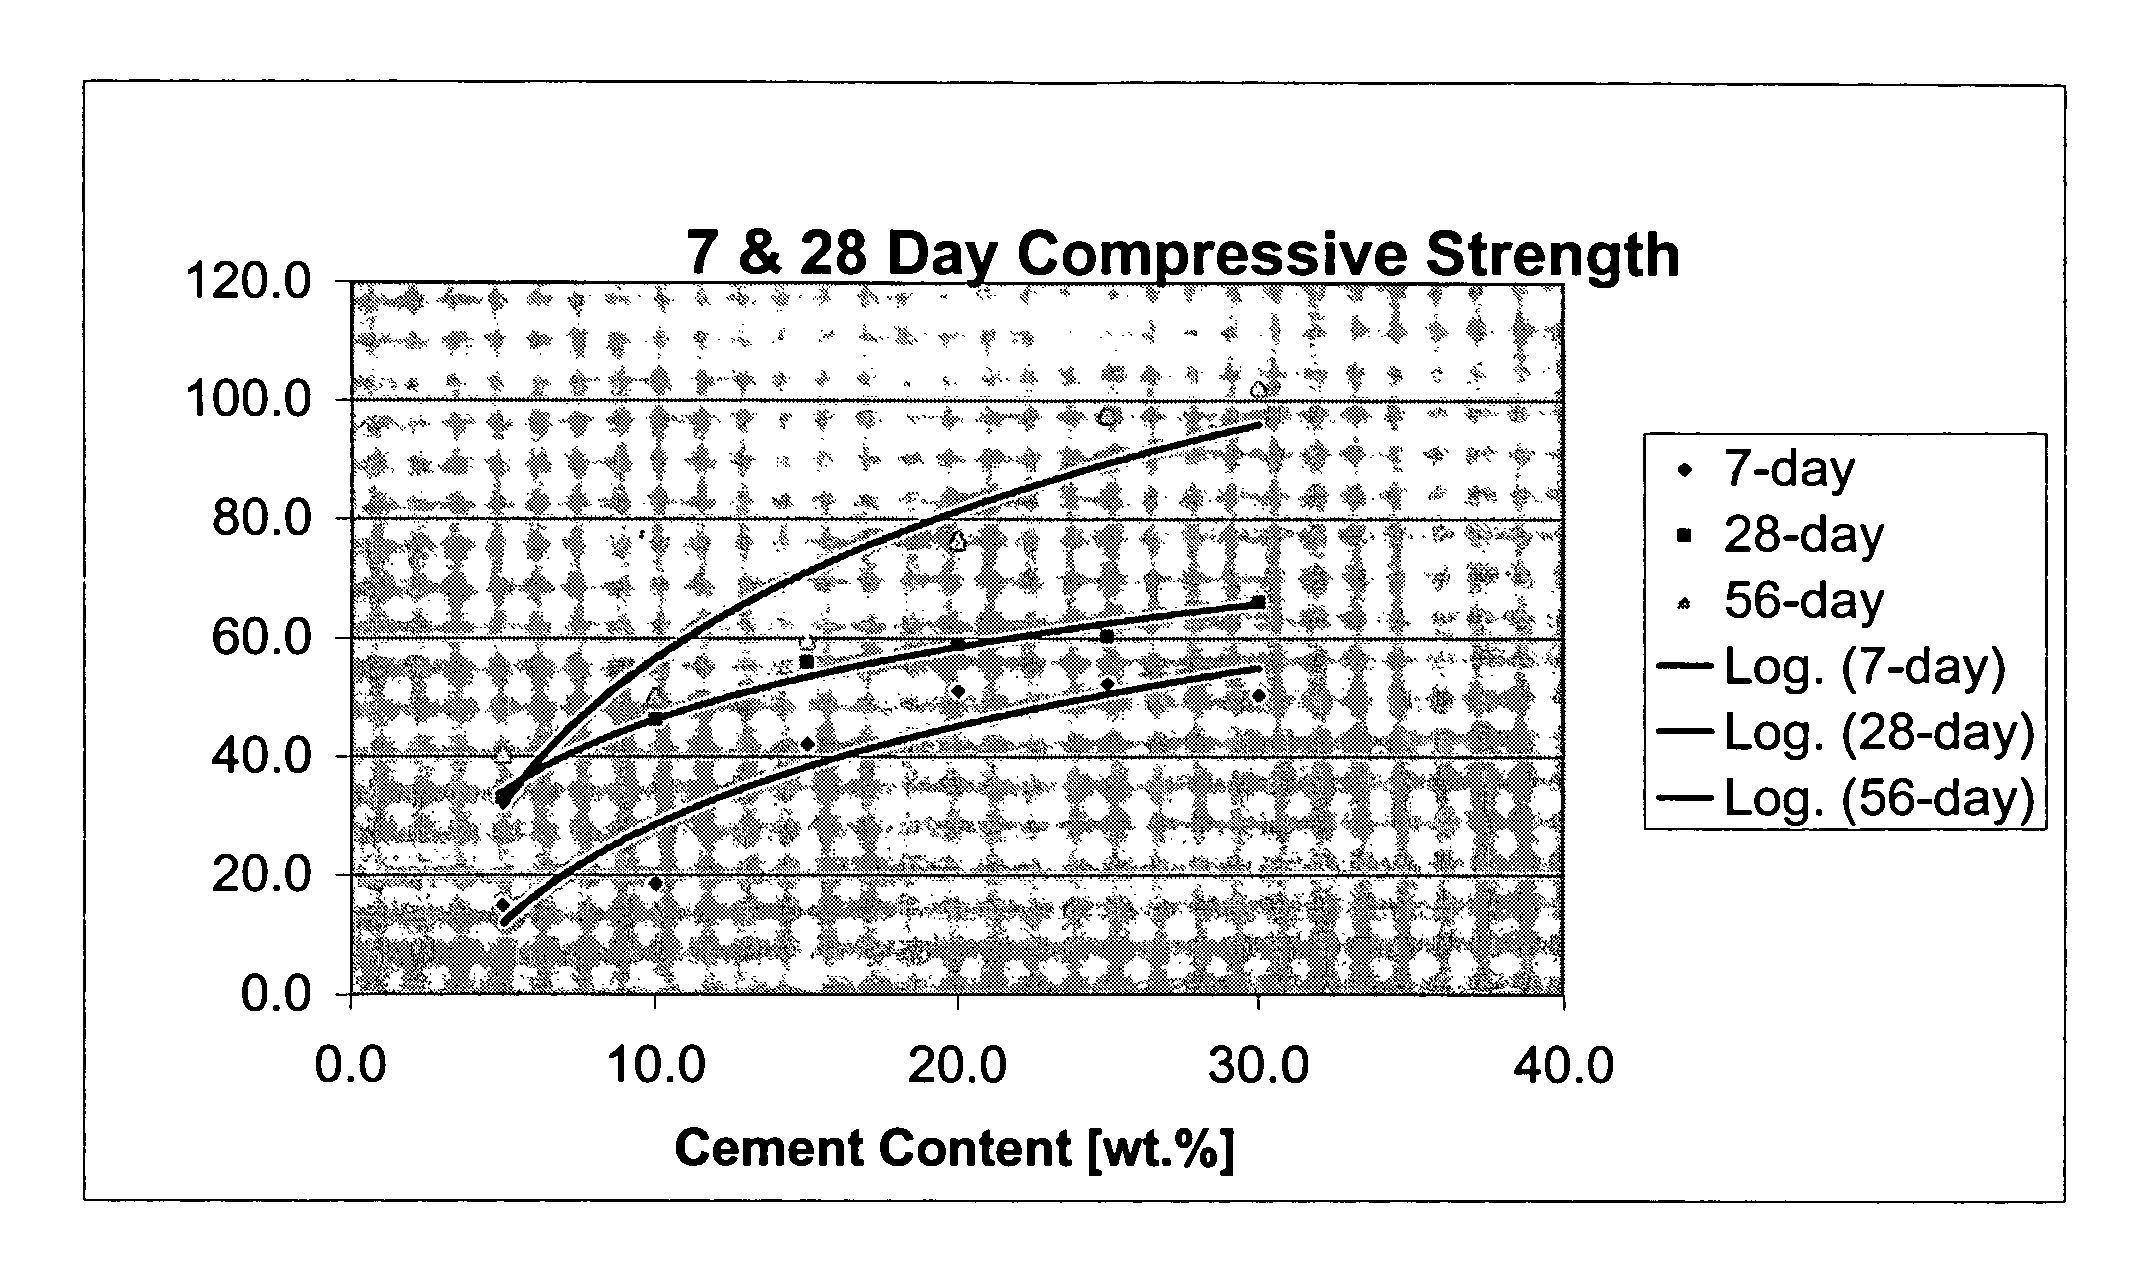 Cementitious composition incorporating high levels of glass aggregate for producing solid surfaces